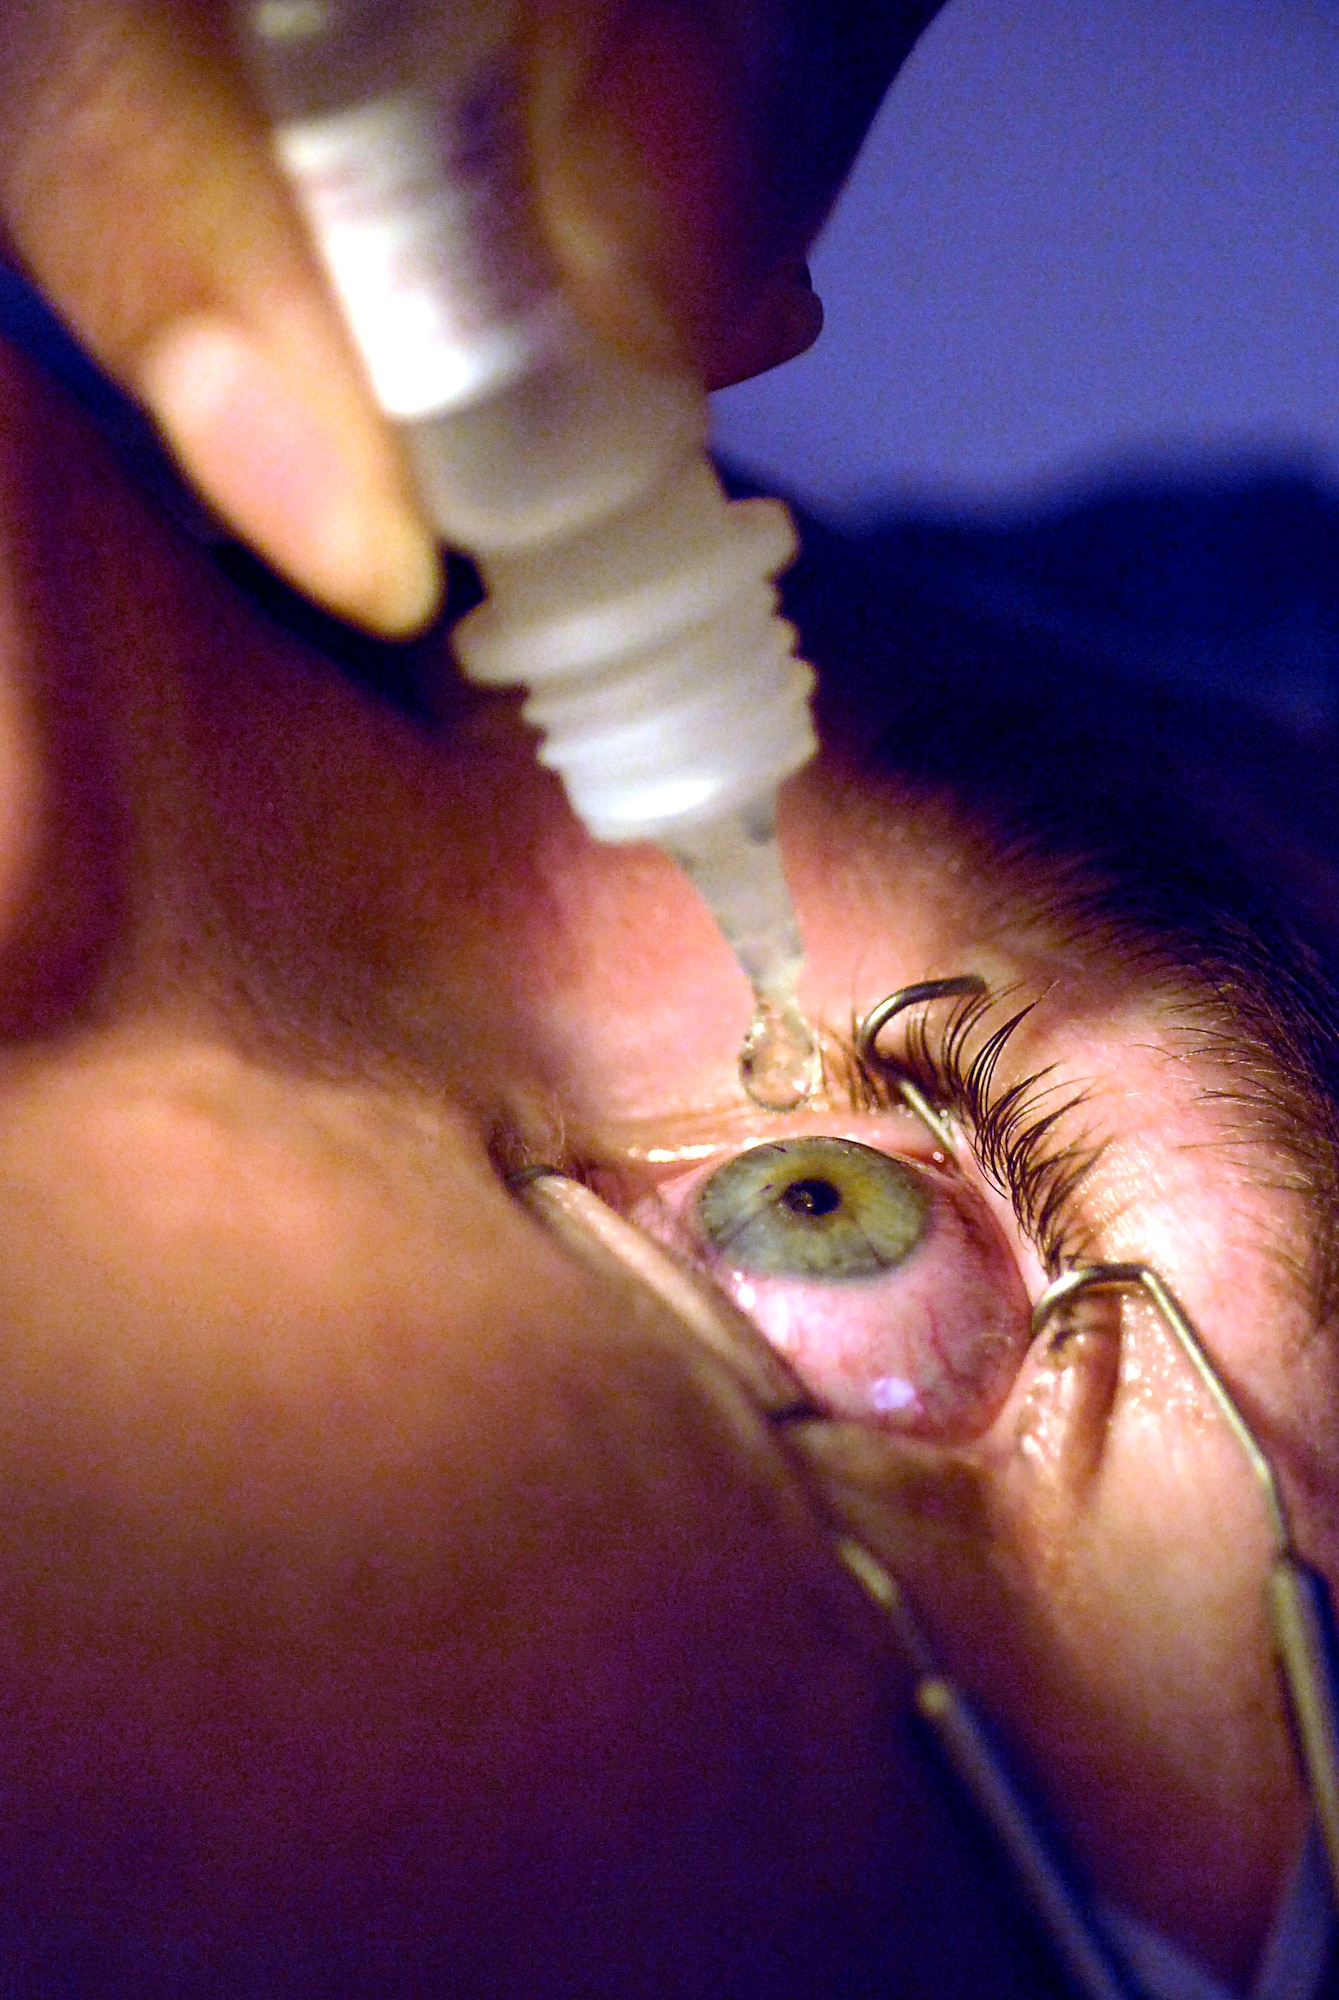 Lt. Col. Charles Reilly drops solution into Senior Airman John Paul Marsh's eye just after laser eye surgery Aug. 23 at the newly opened Defense Department Joint Warfighter Refractive Surgery Center at Lackland Air Force Base, Texas. Colonel Reilly is the chief of the Warfighter Refractive Surgery Center and Airman Marsh is with the Air Force Band of the West. (U.S. Air Force photo/Tech. Sgt. Larry A. Simmons) 